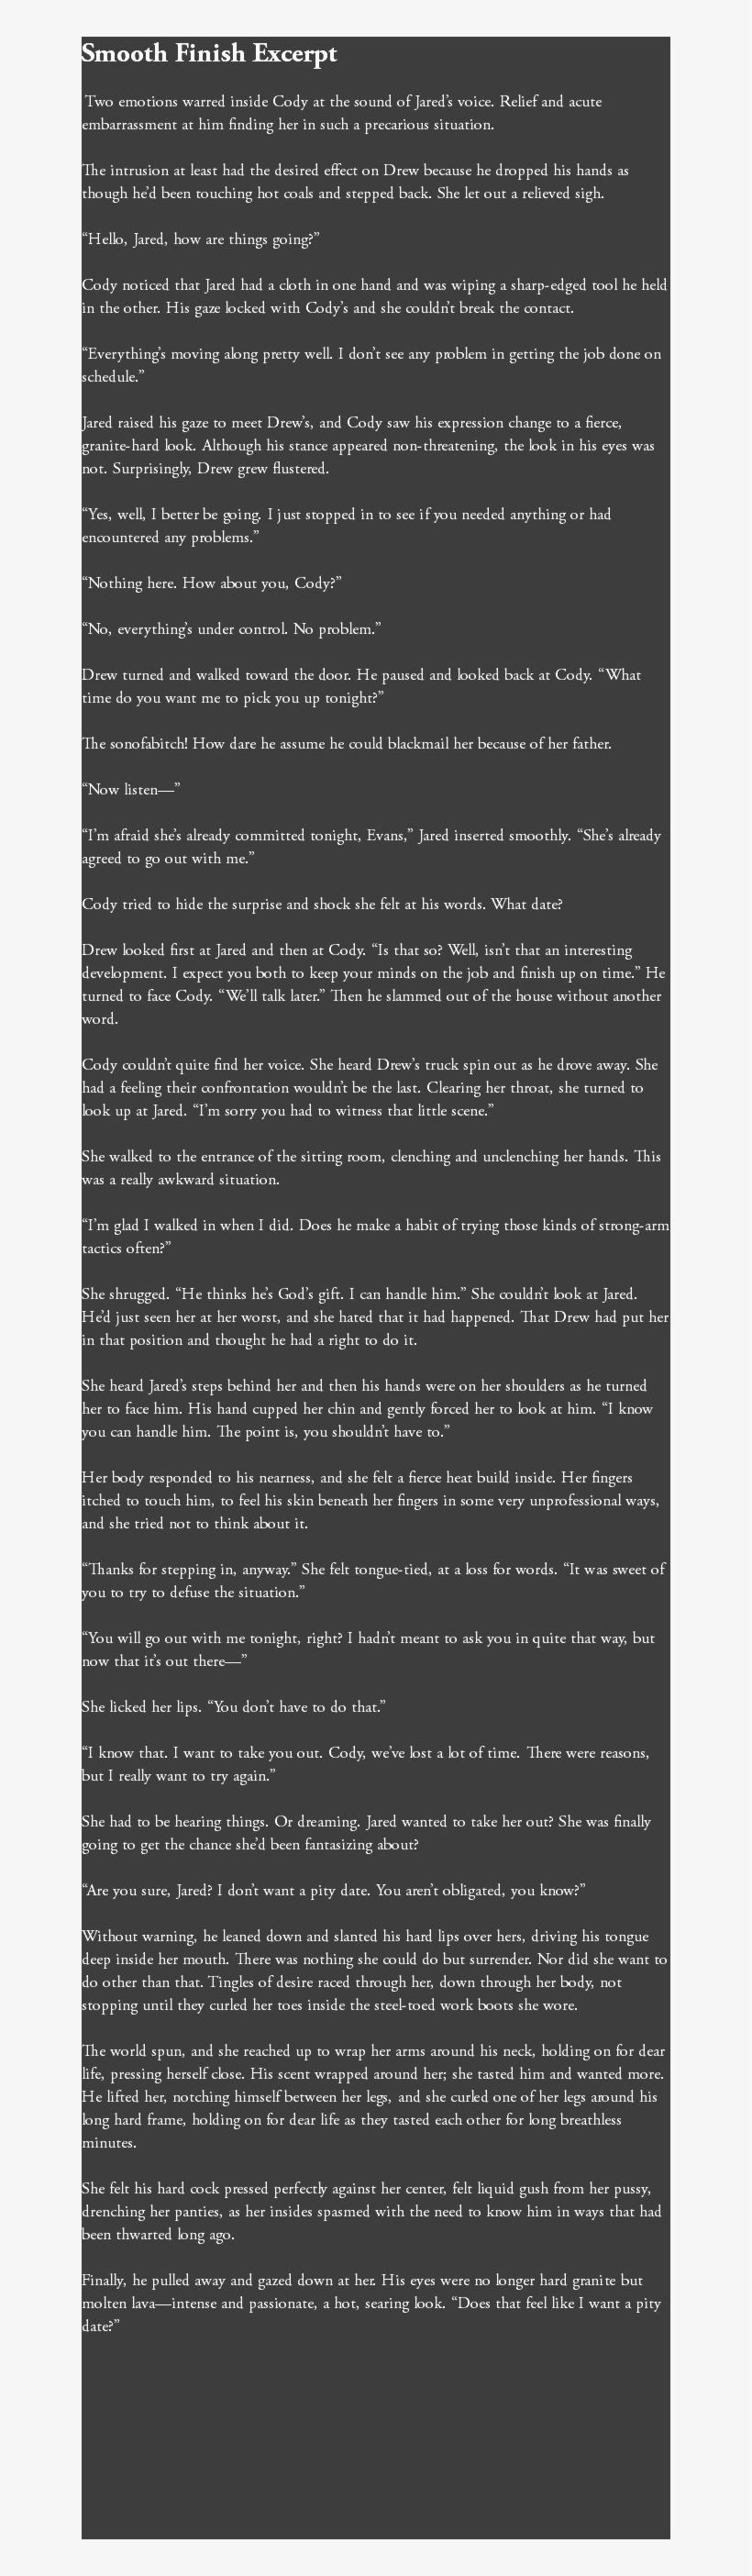 Smooth Finish Excerpt Two Emotions Warred Inside Cody - Wedding Crashers, transparent png #2686250